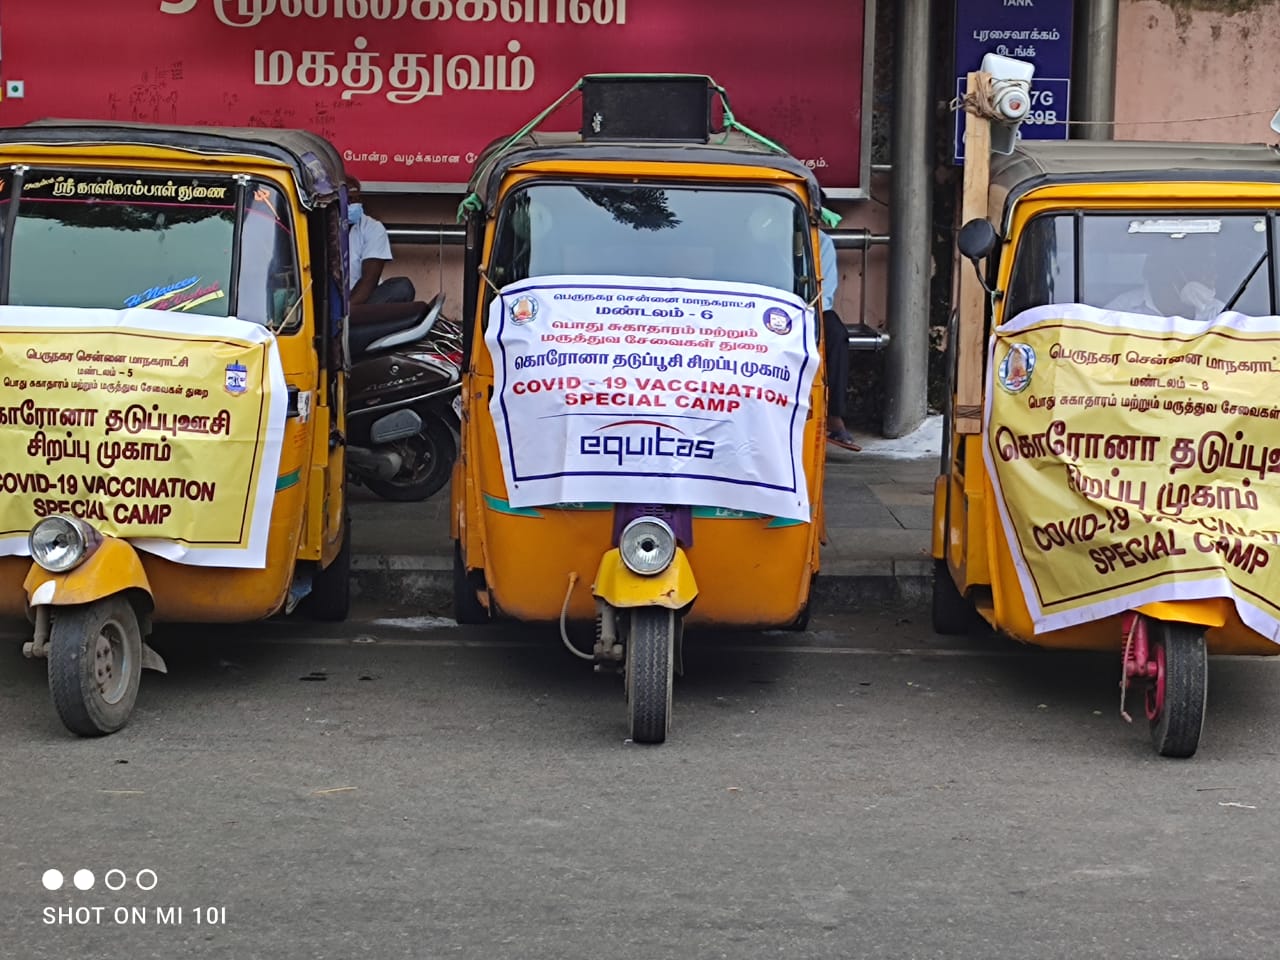 Equitas vaccination camps advertised on tuk tuts